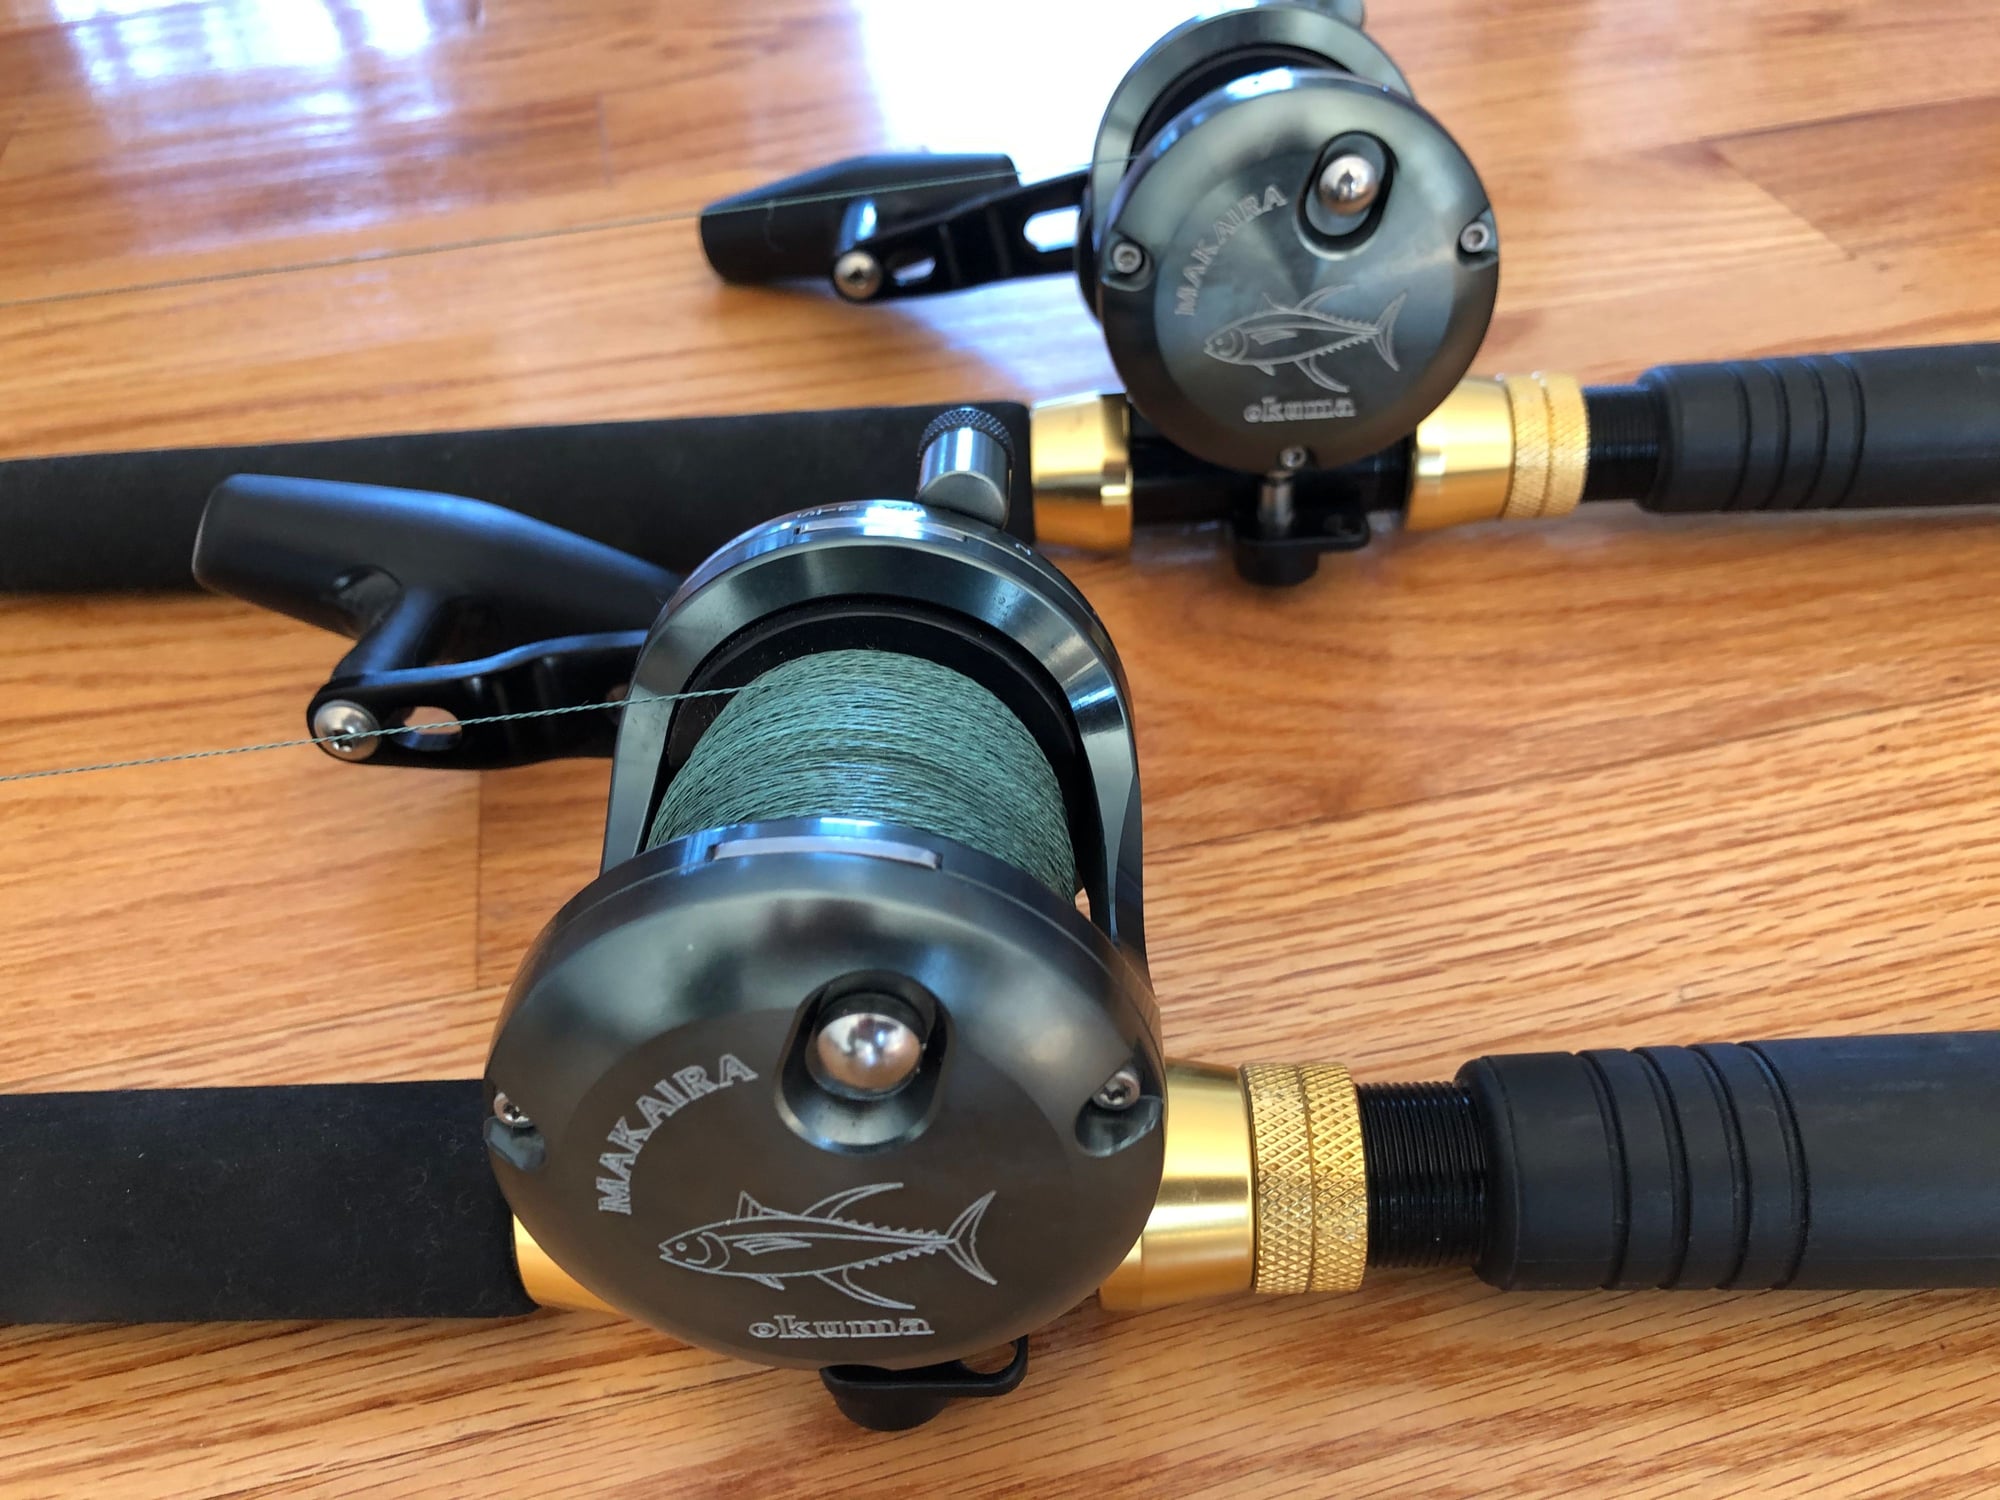 Okuma MK 15IISEa Makaira 2 Speed Lever Drag Reels with Connley 6'6” 30-50  Fishing Rod - The Hull Truth - Boating and Fishing Forum